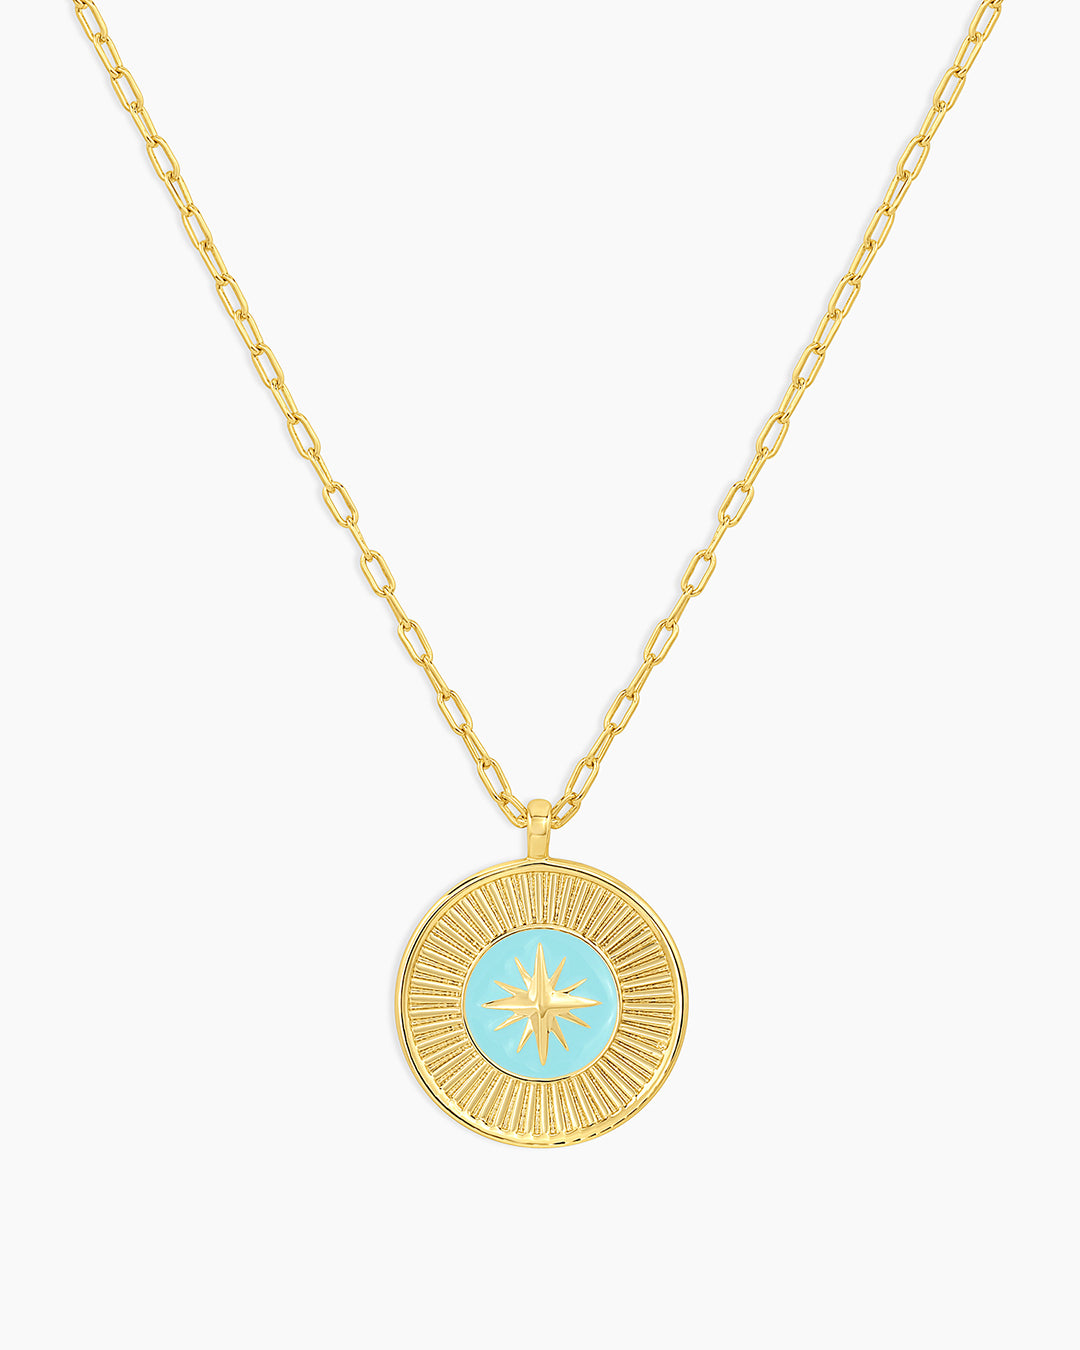 EFYTAL Compass Necklace • The Best 18th Birthday Gift Idea for Her - EFYTAL  Jewelry